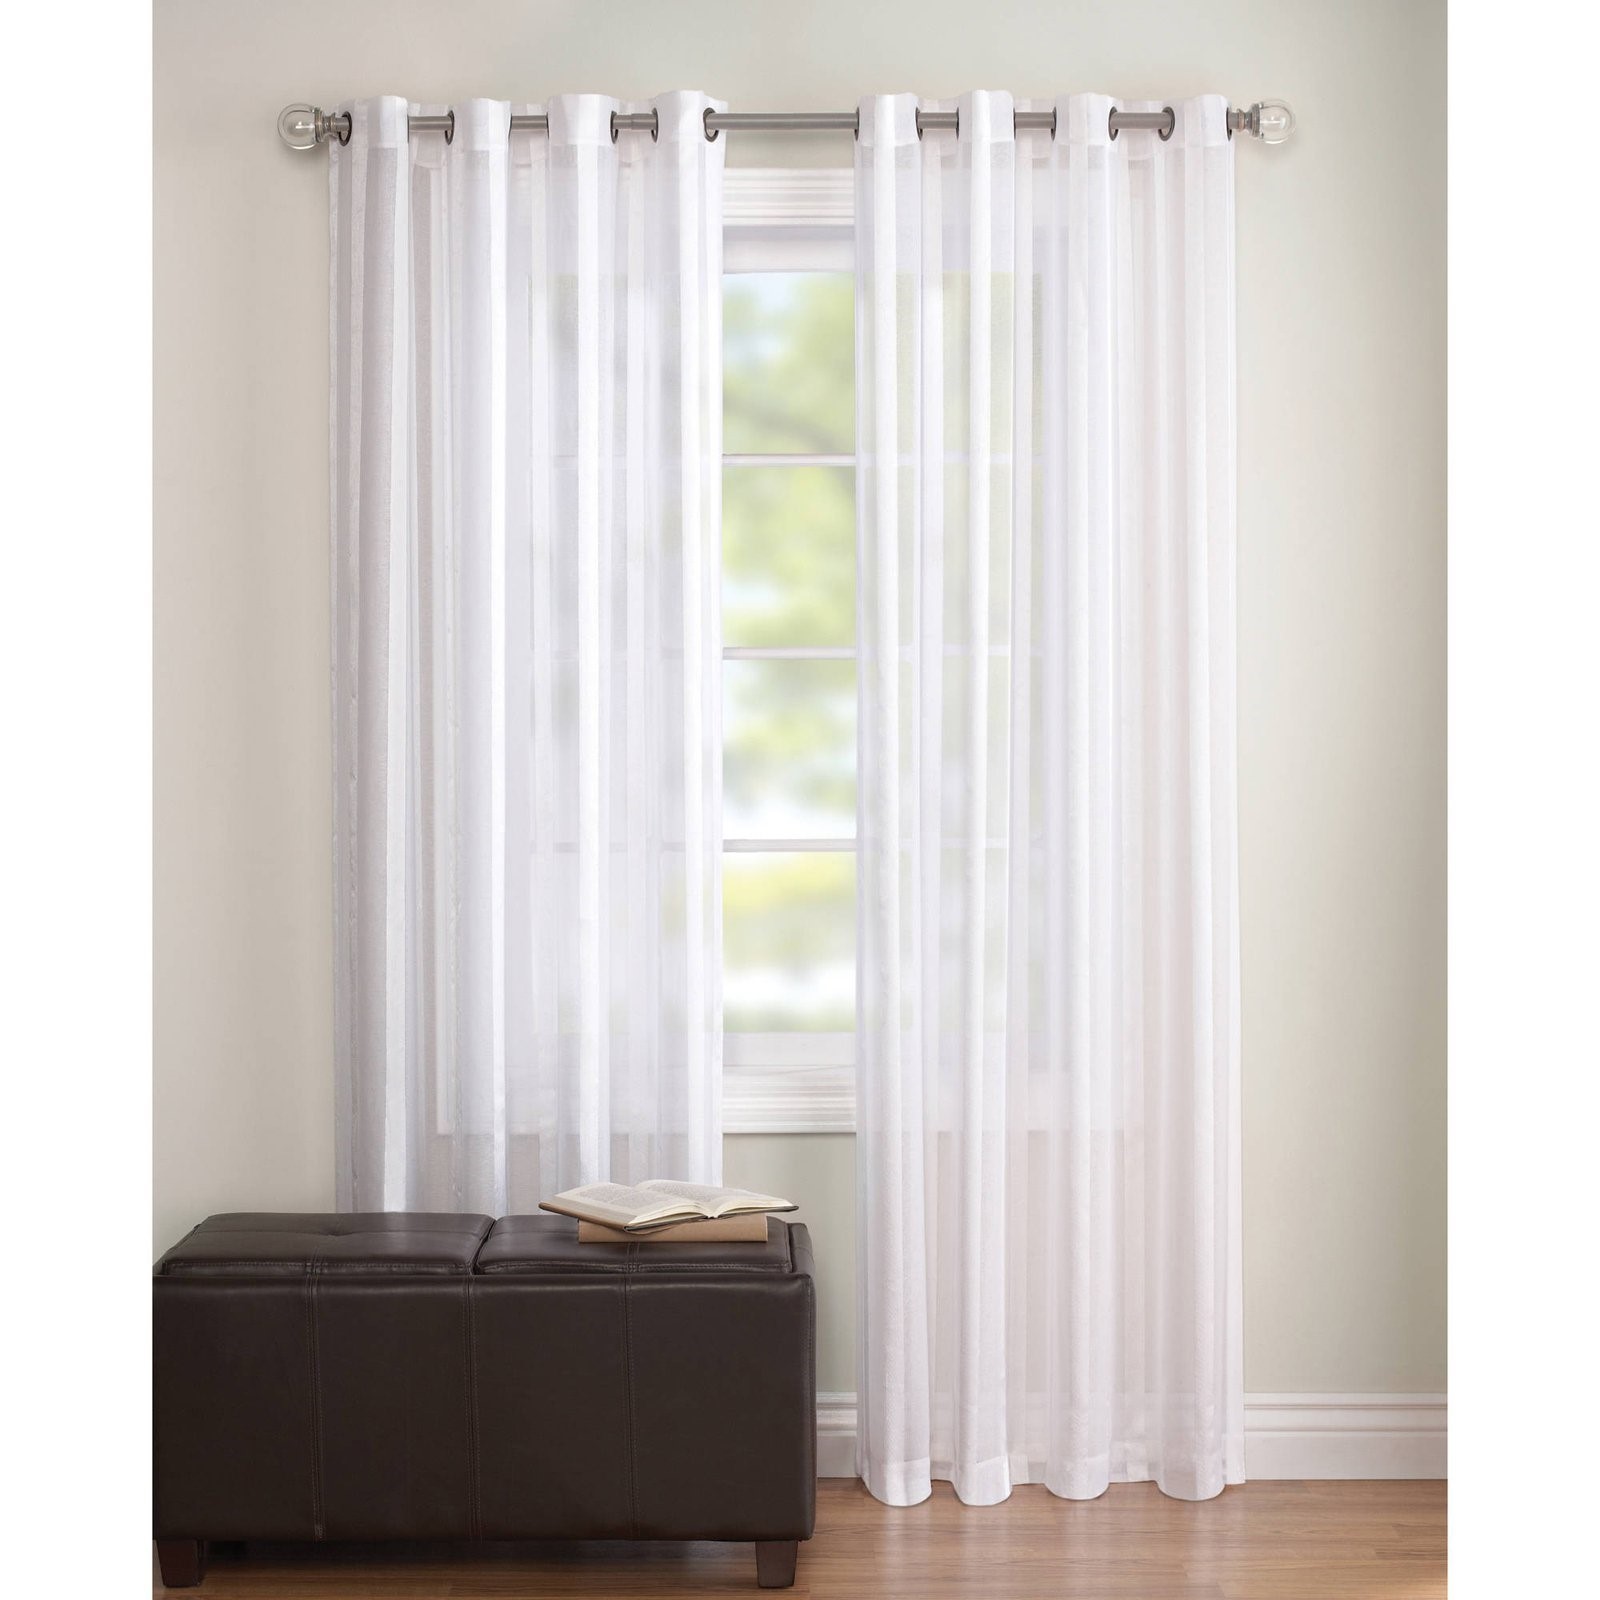 Better Homes and Gardens Toby Textured Stripe Sheer Window Curtain Panel - image 3 of 4